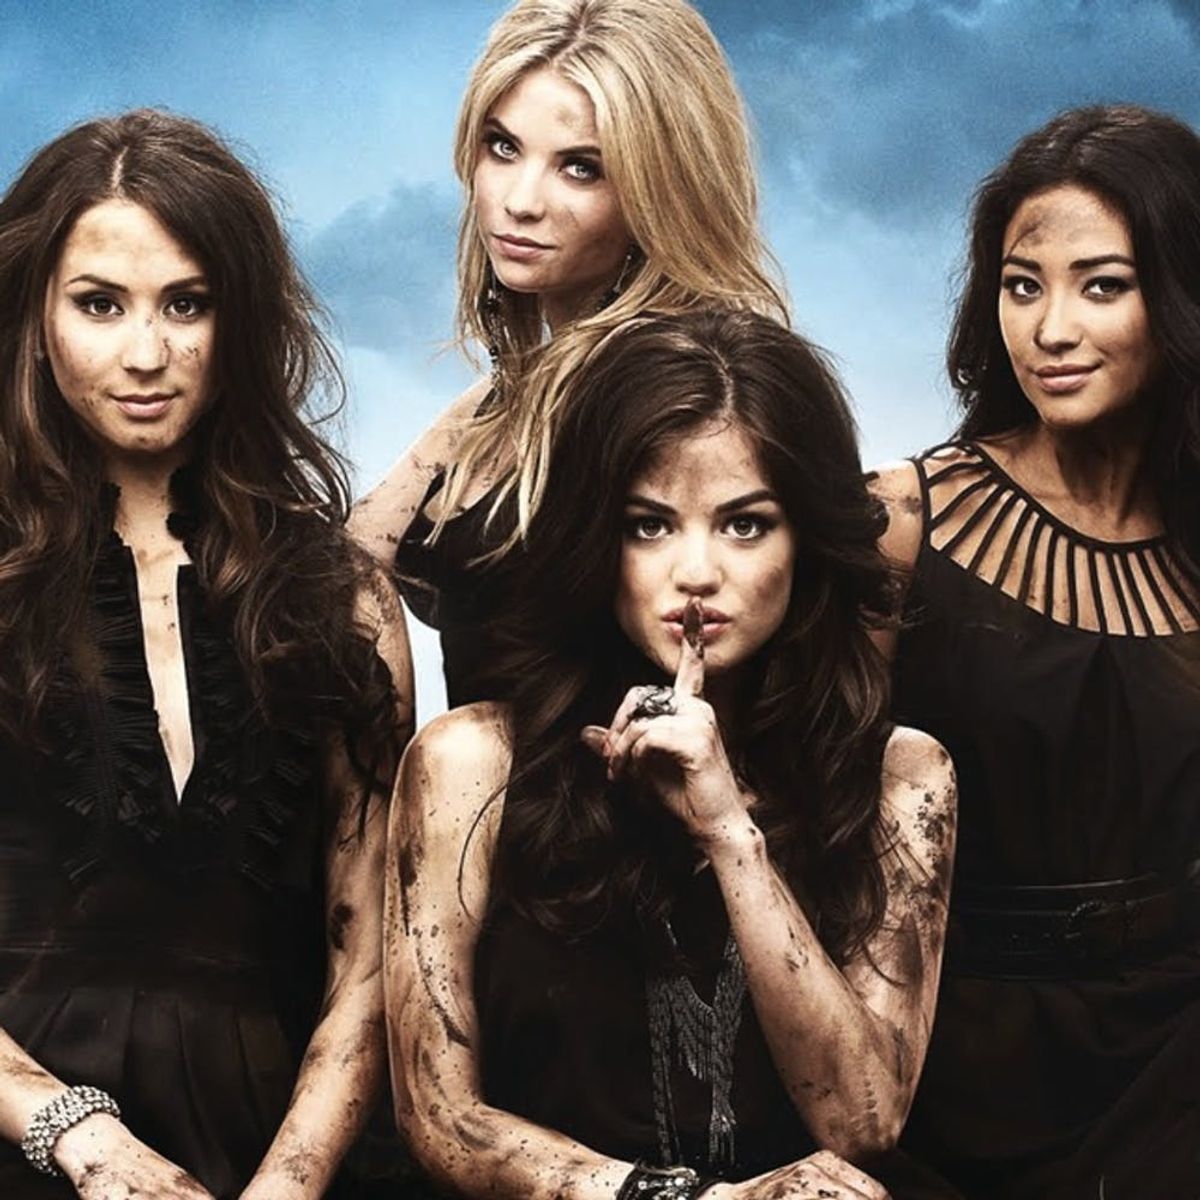 Goodbye to Pretty Little Liars, a Show That Strengthened My Friendships